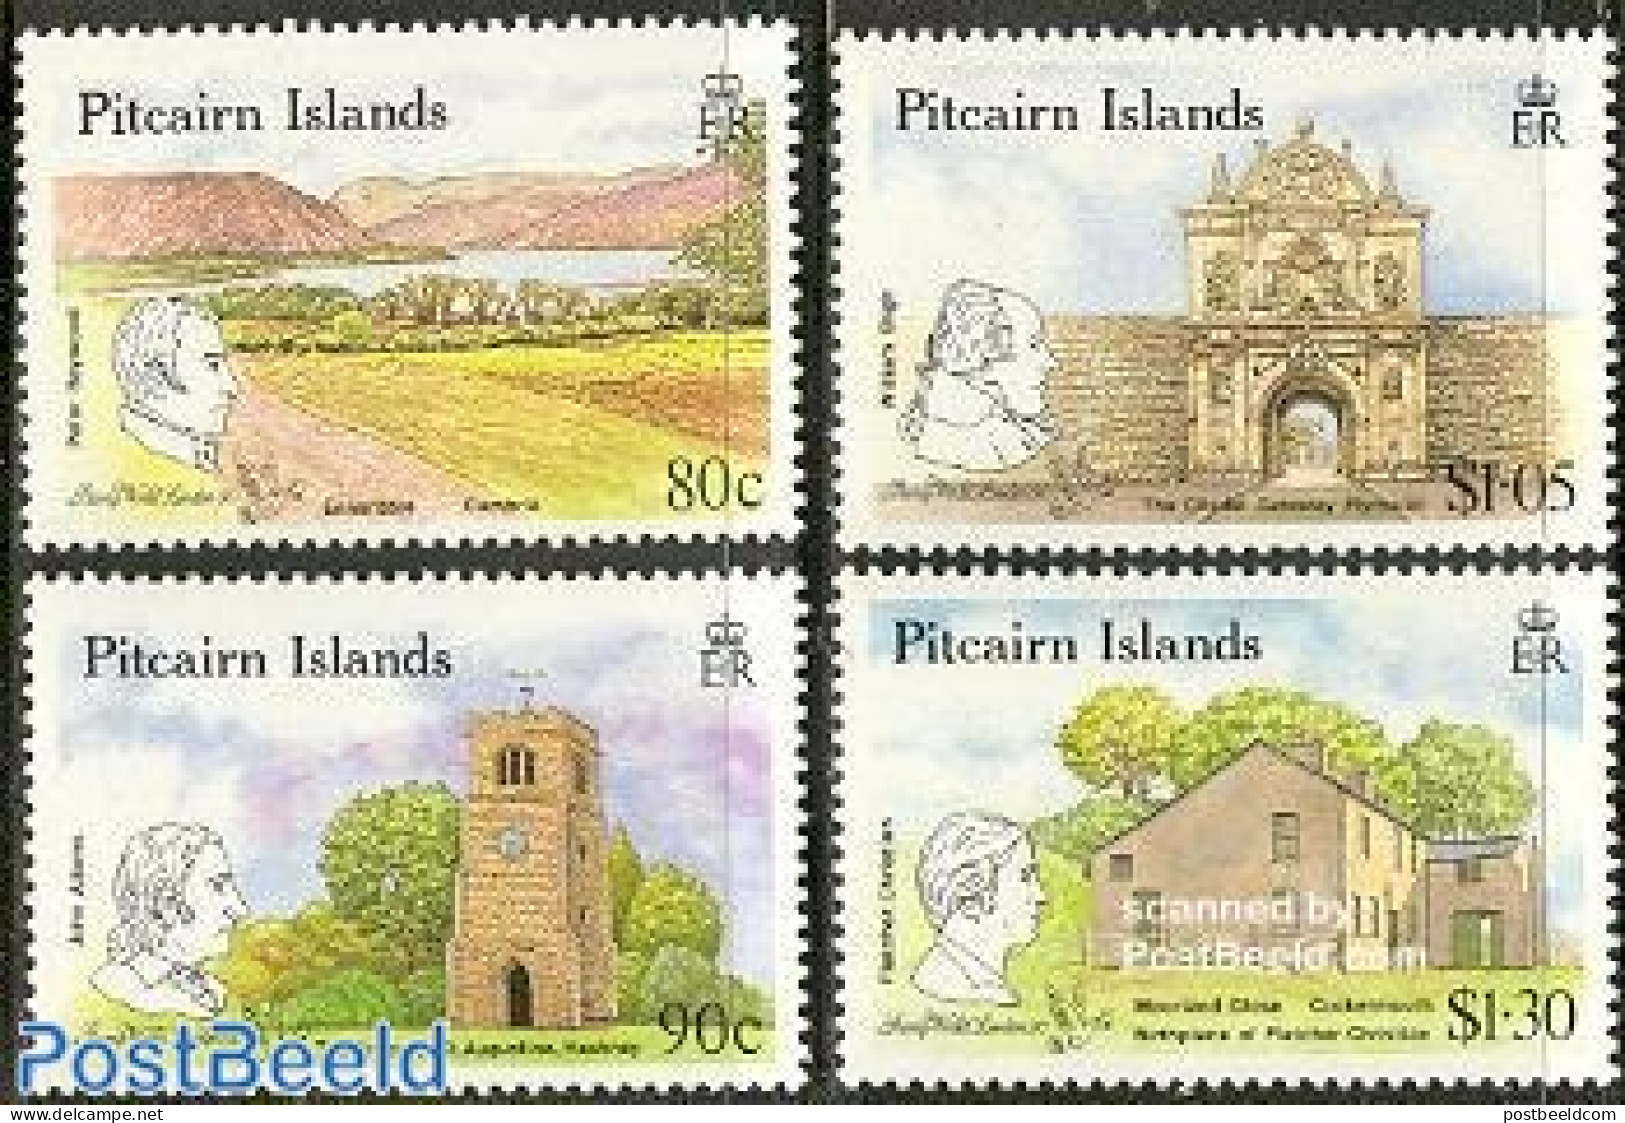 Pitcairn Islands 1990 Stamp World London 4v, Mint NH, Religion - Churches, Temples, Mosques, Synagogues - Philately - Churches & Cathedrals